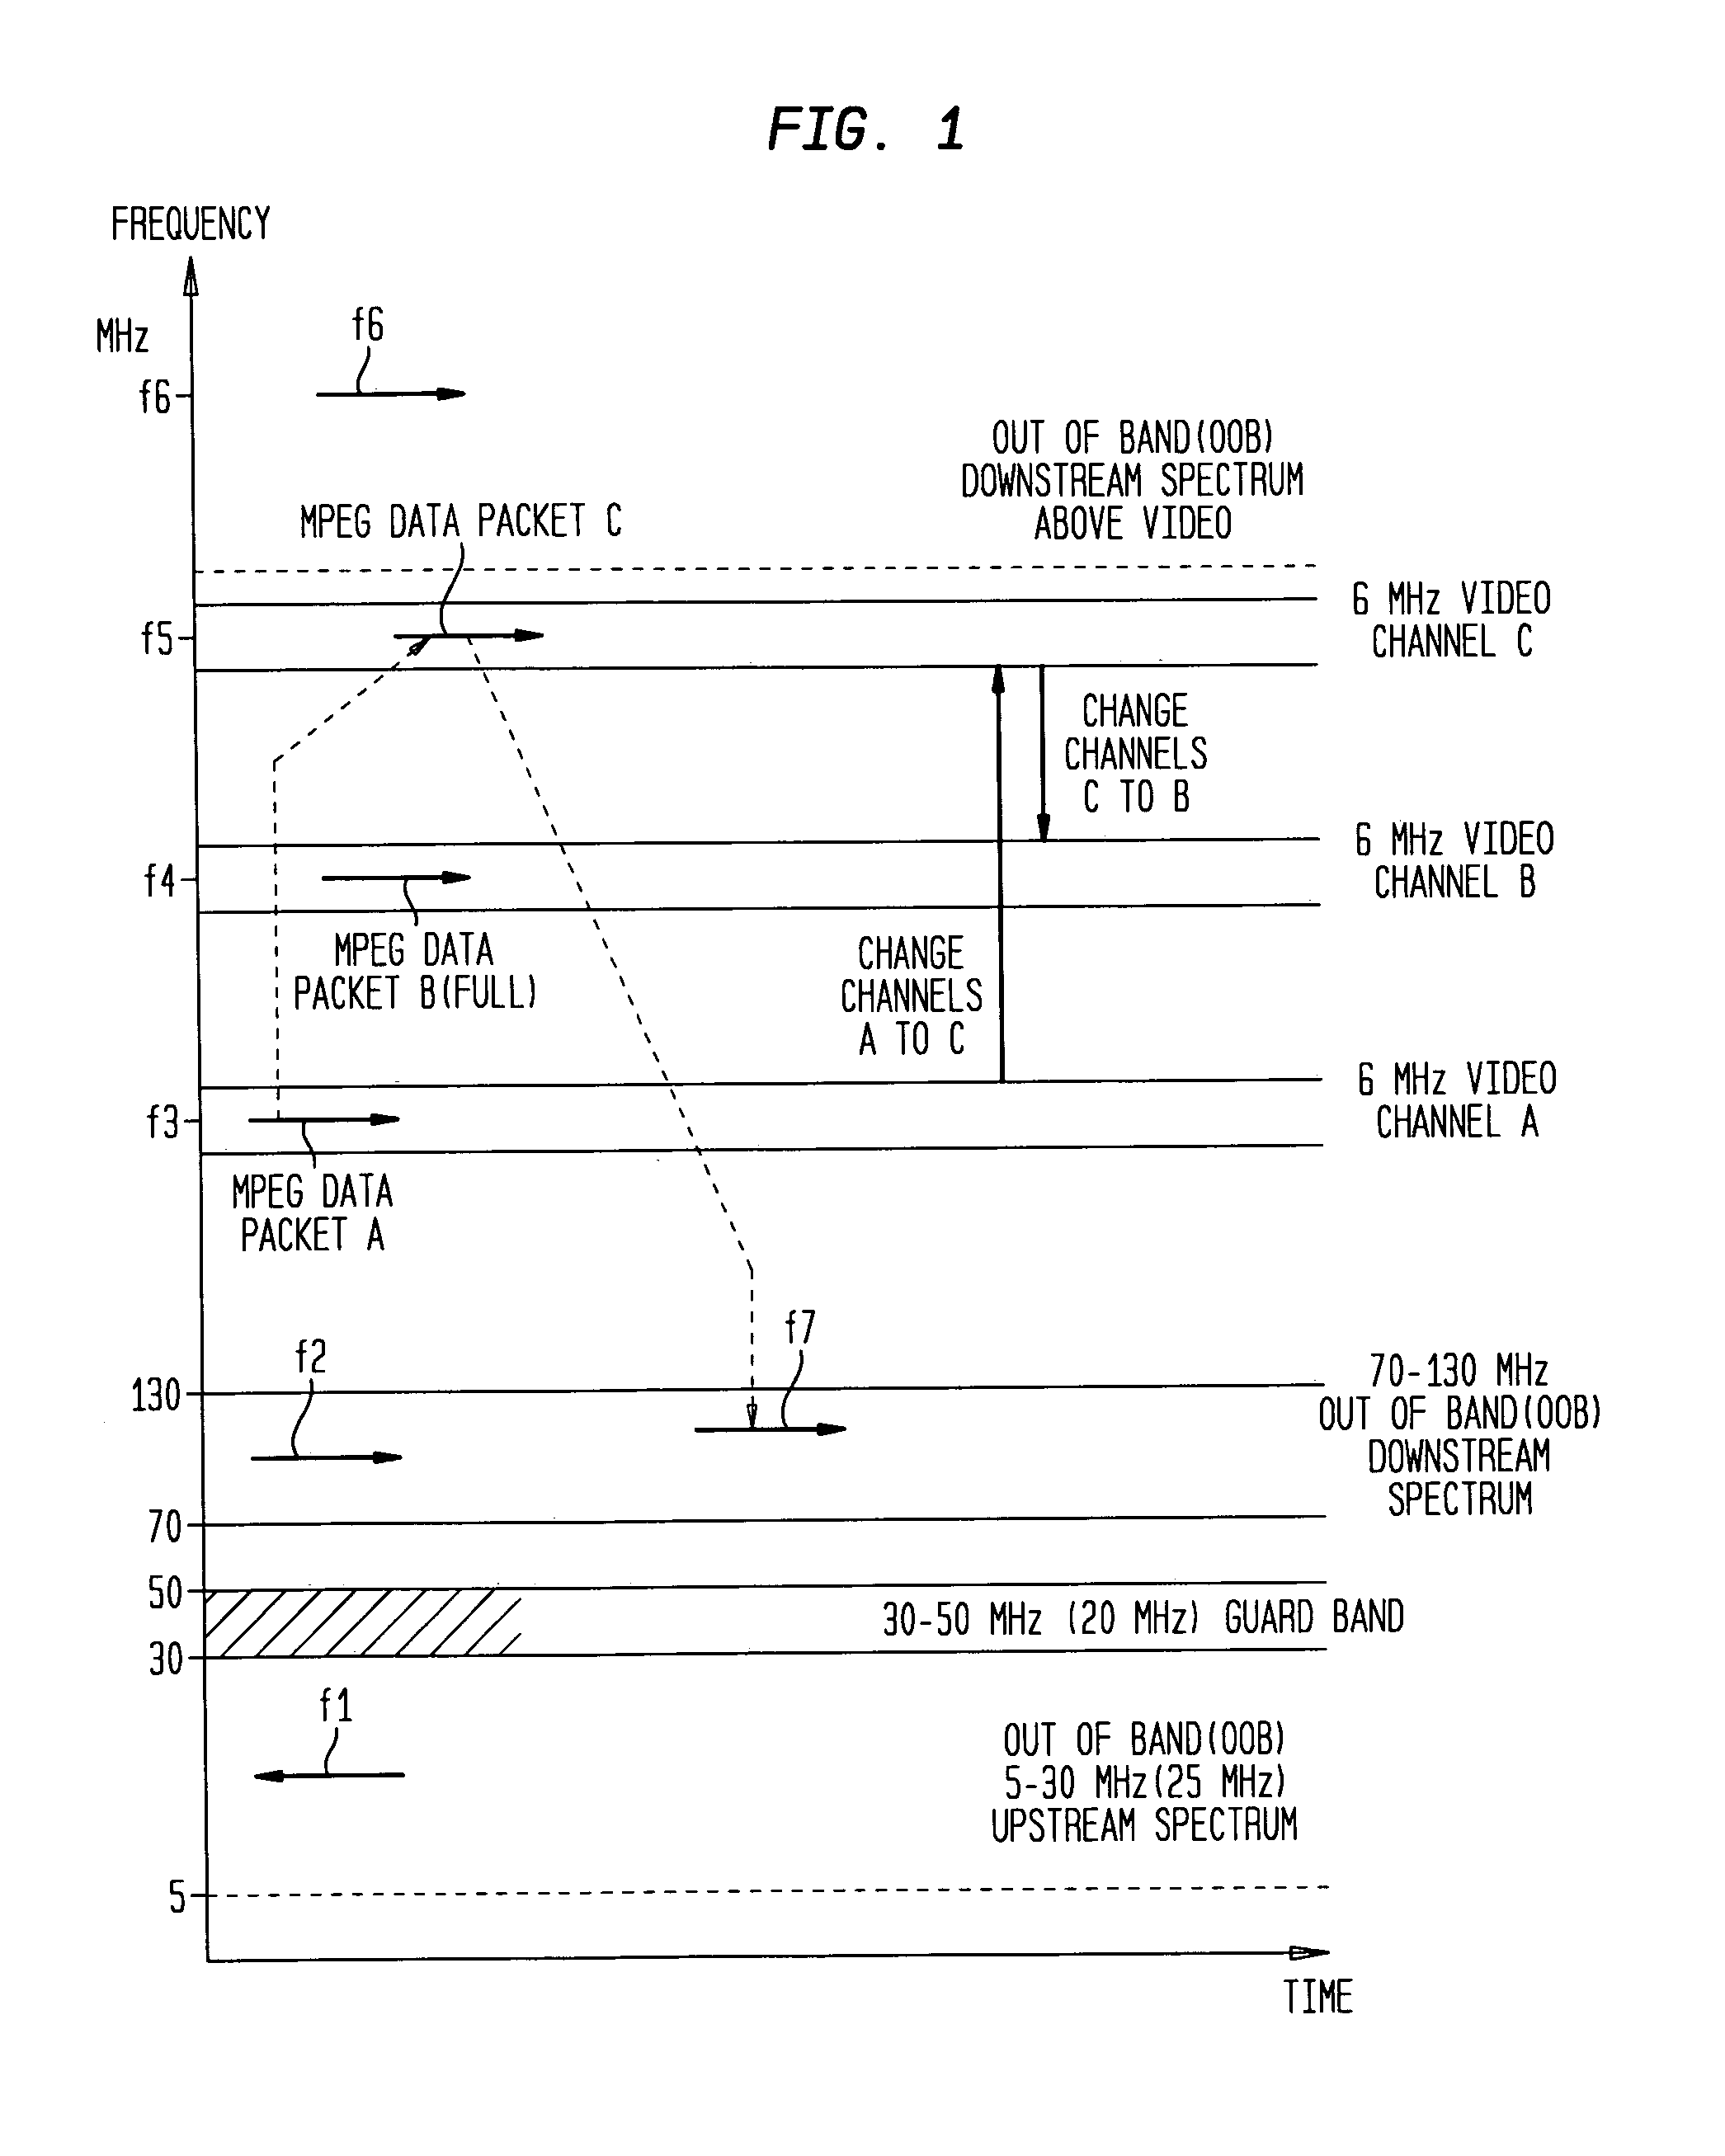 Method and apparatus for two-way internet access over a CATV network with channel tracking